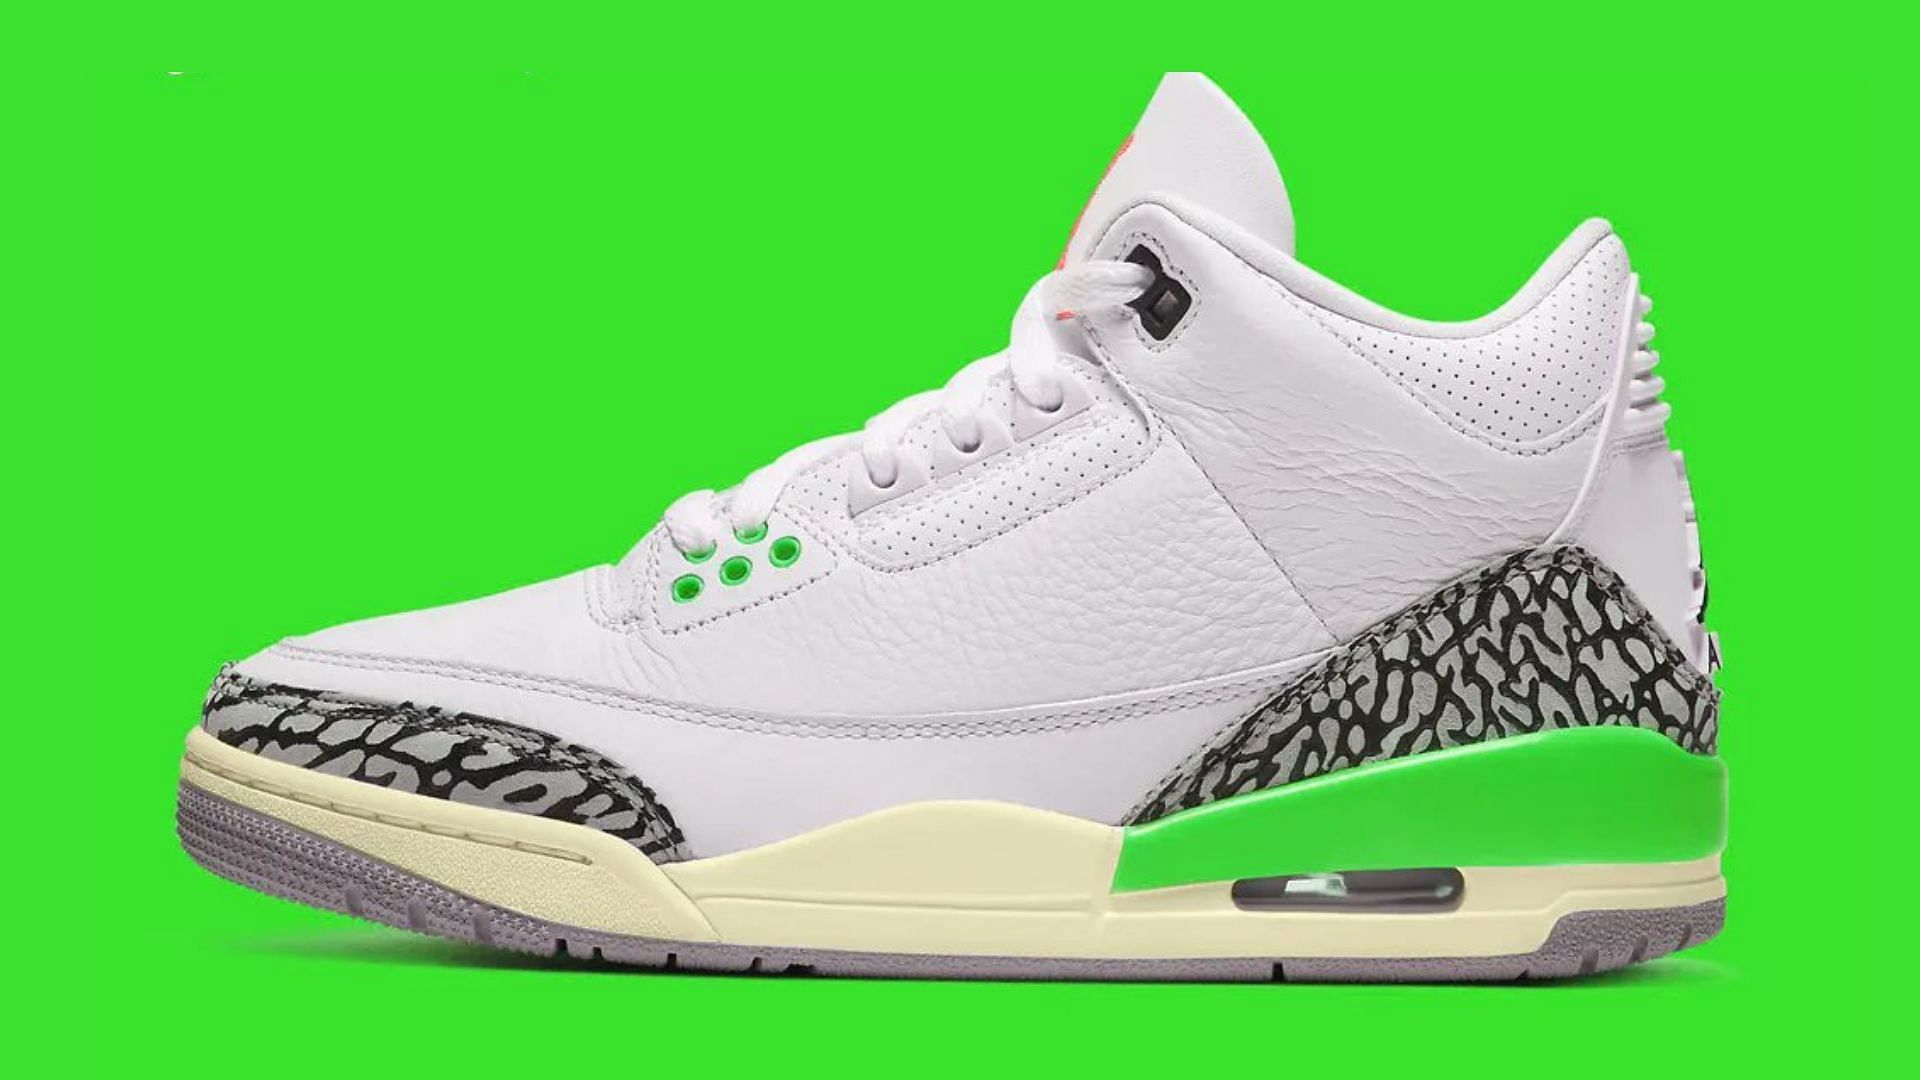 Take a closer look at the upcoming AJ3 Lucky Green shoes (Image via Twitter/@kicksonfire)